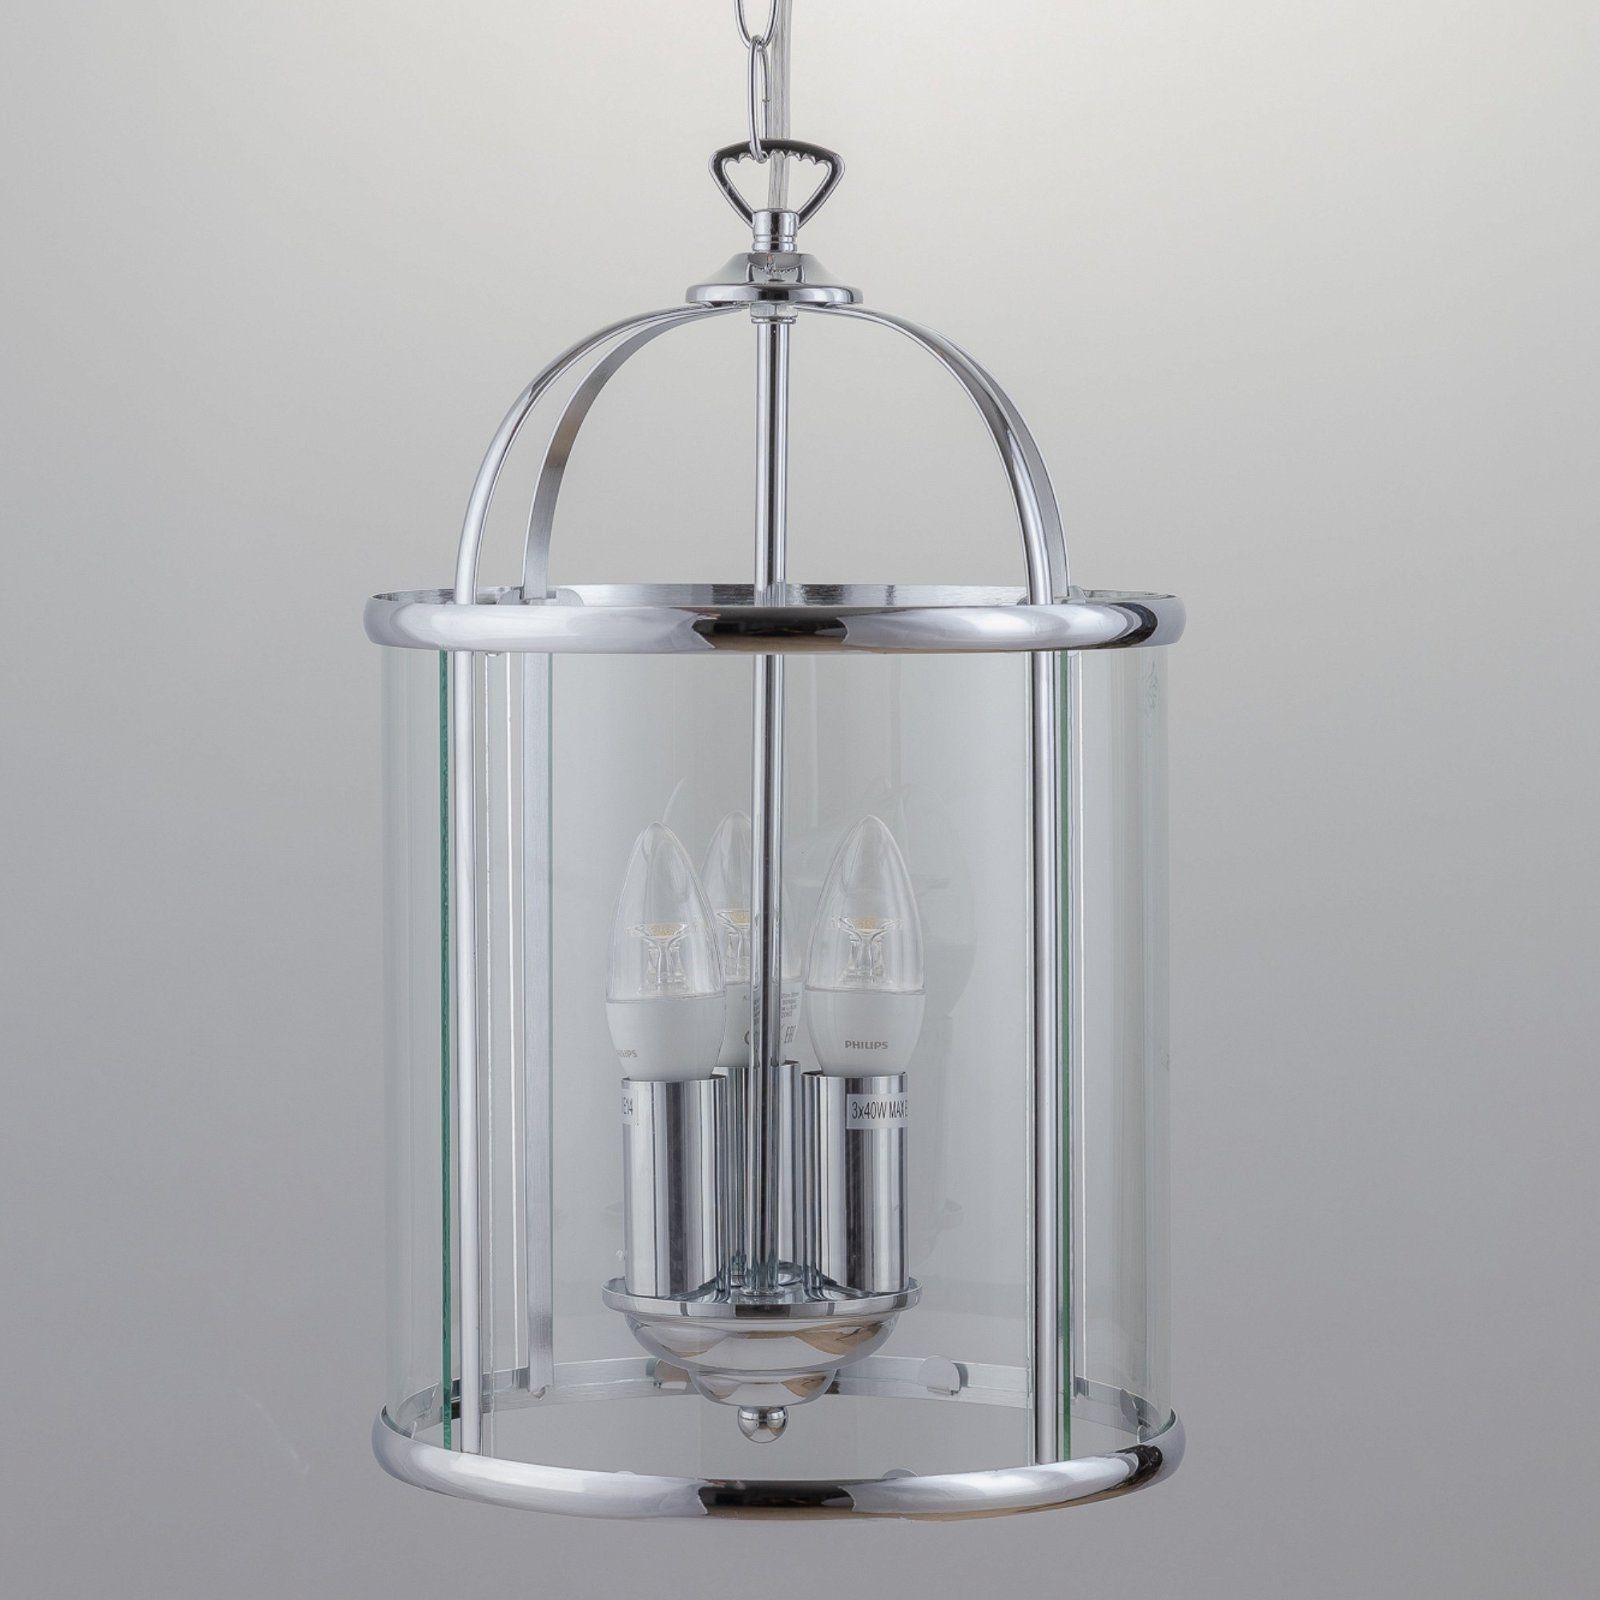 Polished Chrome 3 Light Lantern Style Pendant In Chrome Lantern Chandeliers (View 13 of 15)